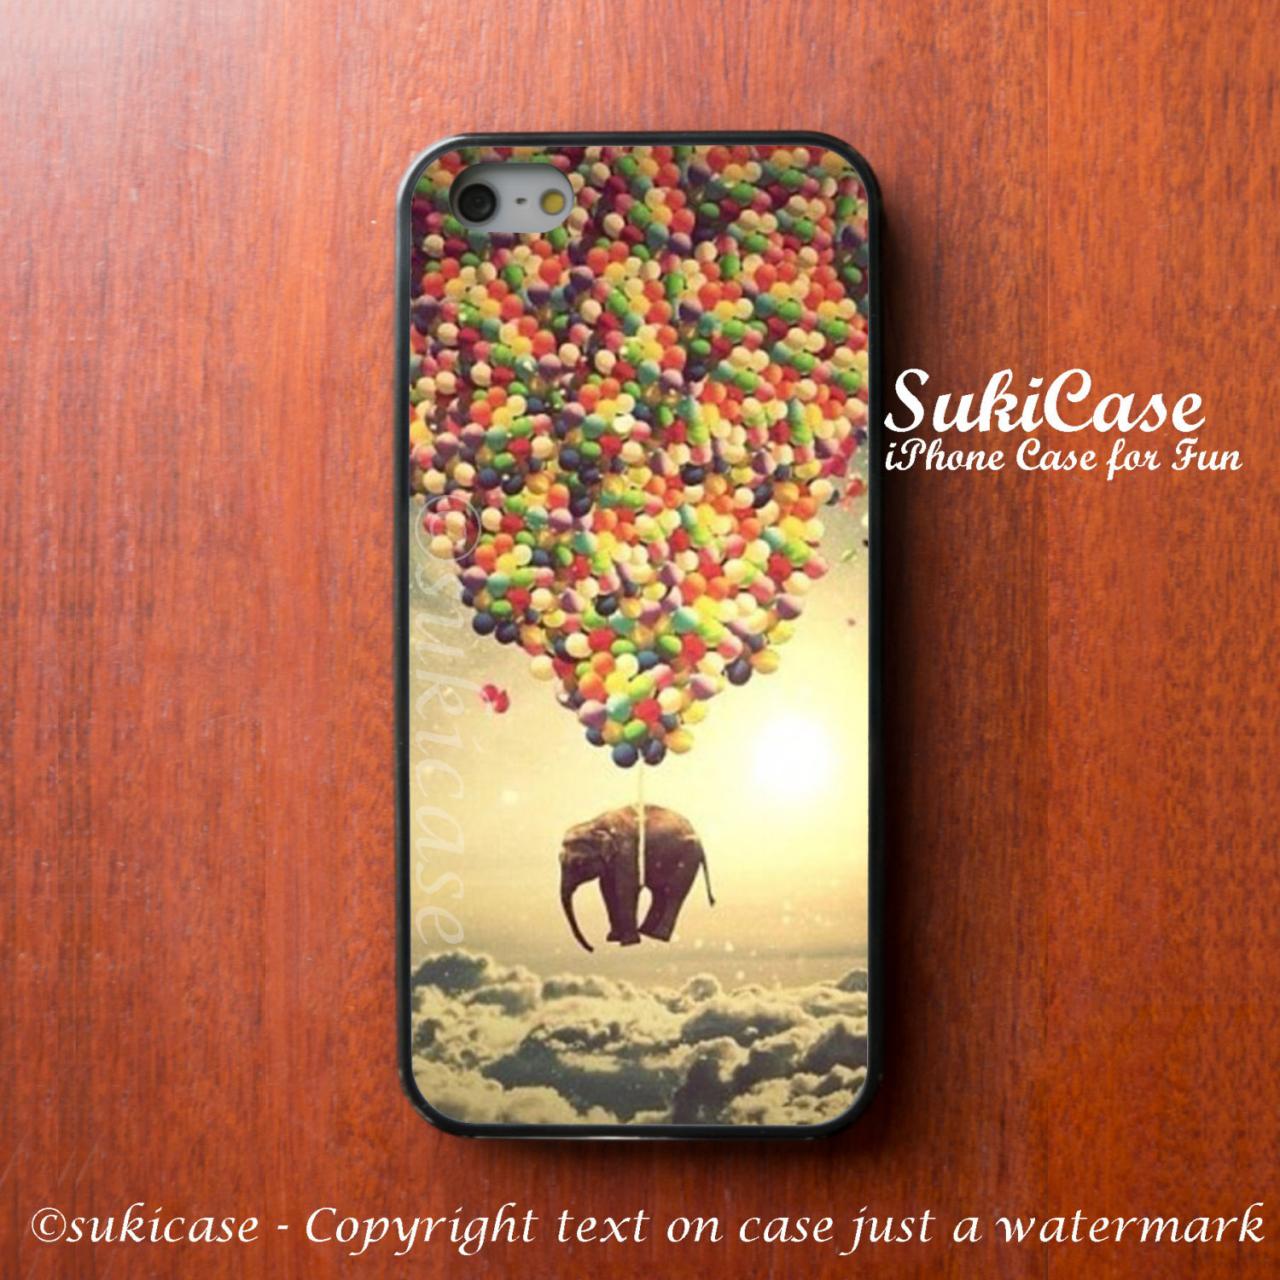 Iphone 5s Case Elephant Up Balloon Cloud Sky Iphone Case Iphone 5 Case Iphone 4 Case Samsung Galaxy S4 Cover Iphone 5c Soft Case Iphone 4s